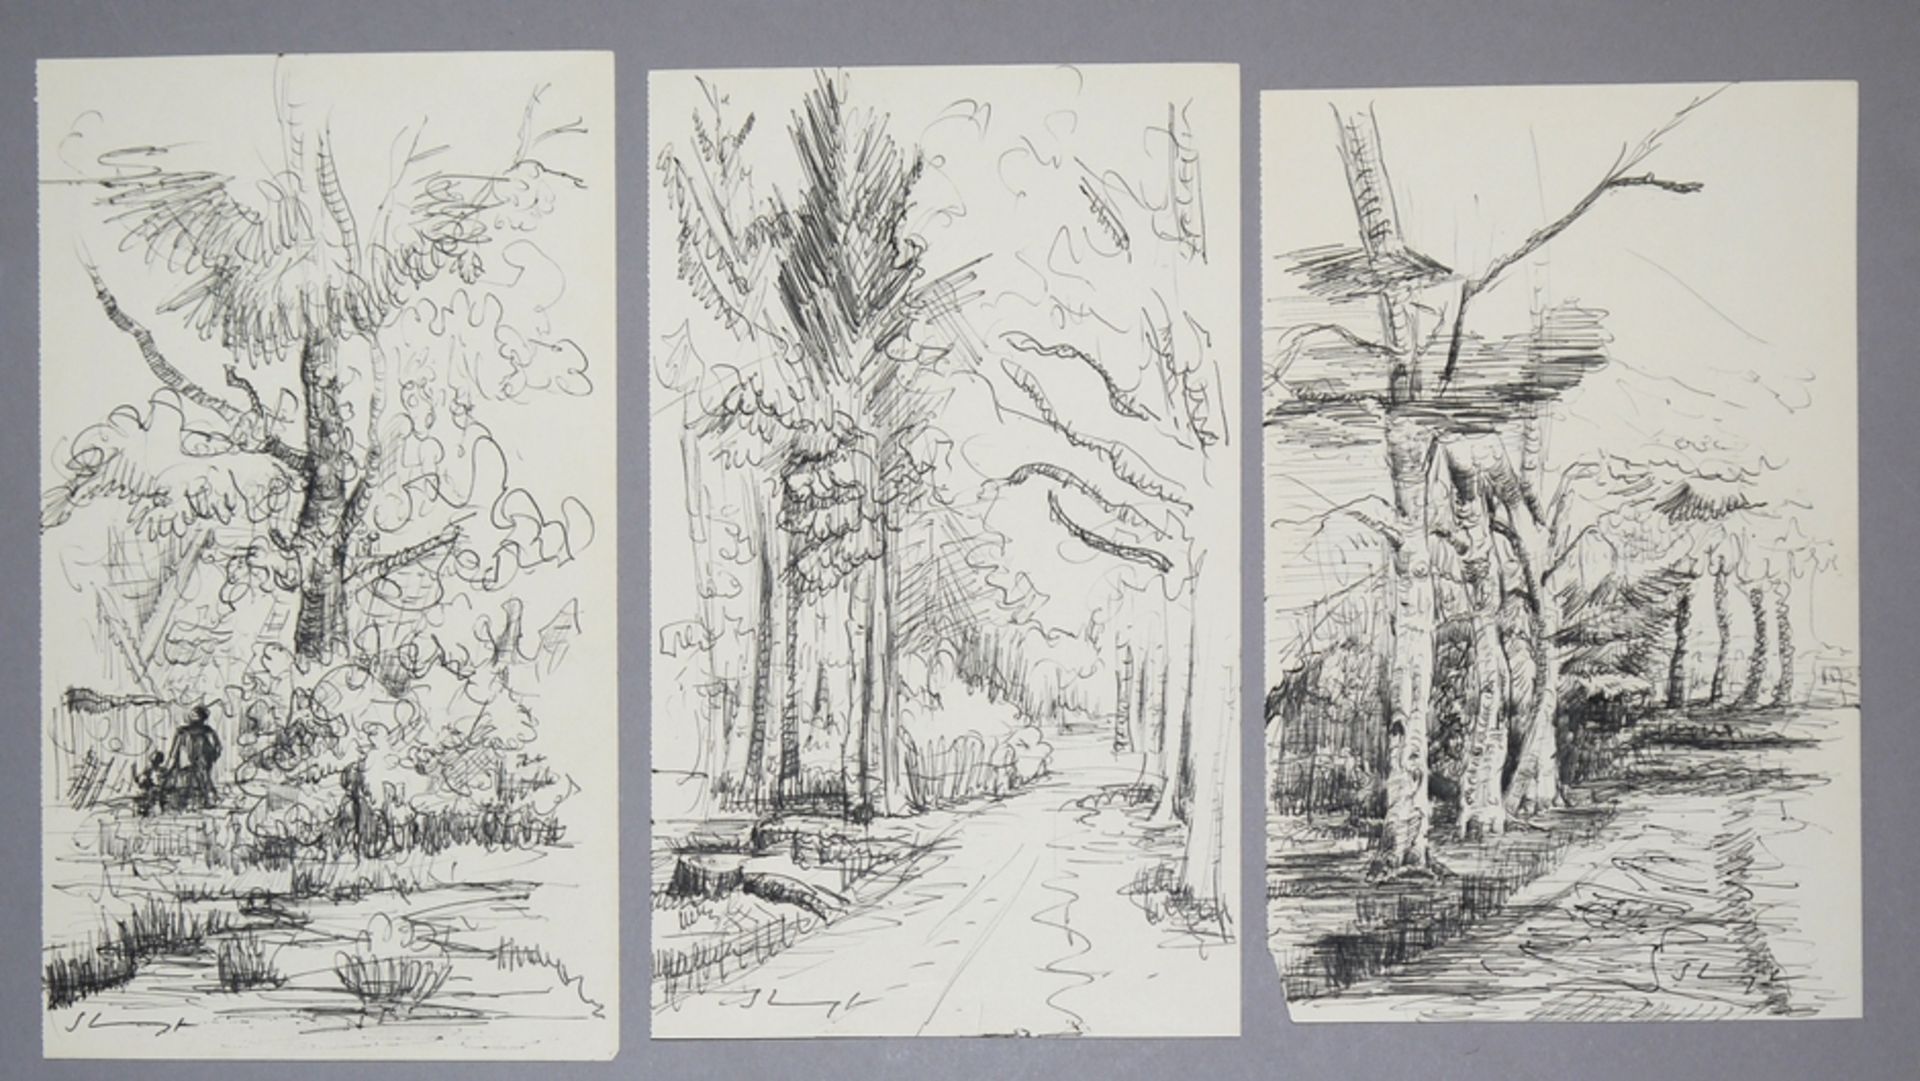 Max Slevogt, 3 ink drawings "Trees" c. 1910/20, signed